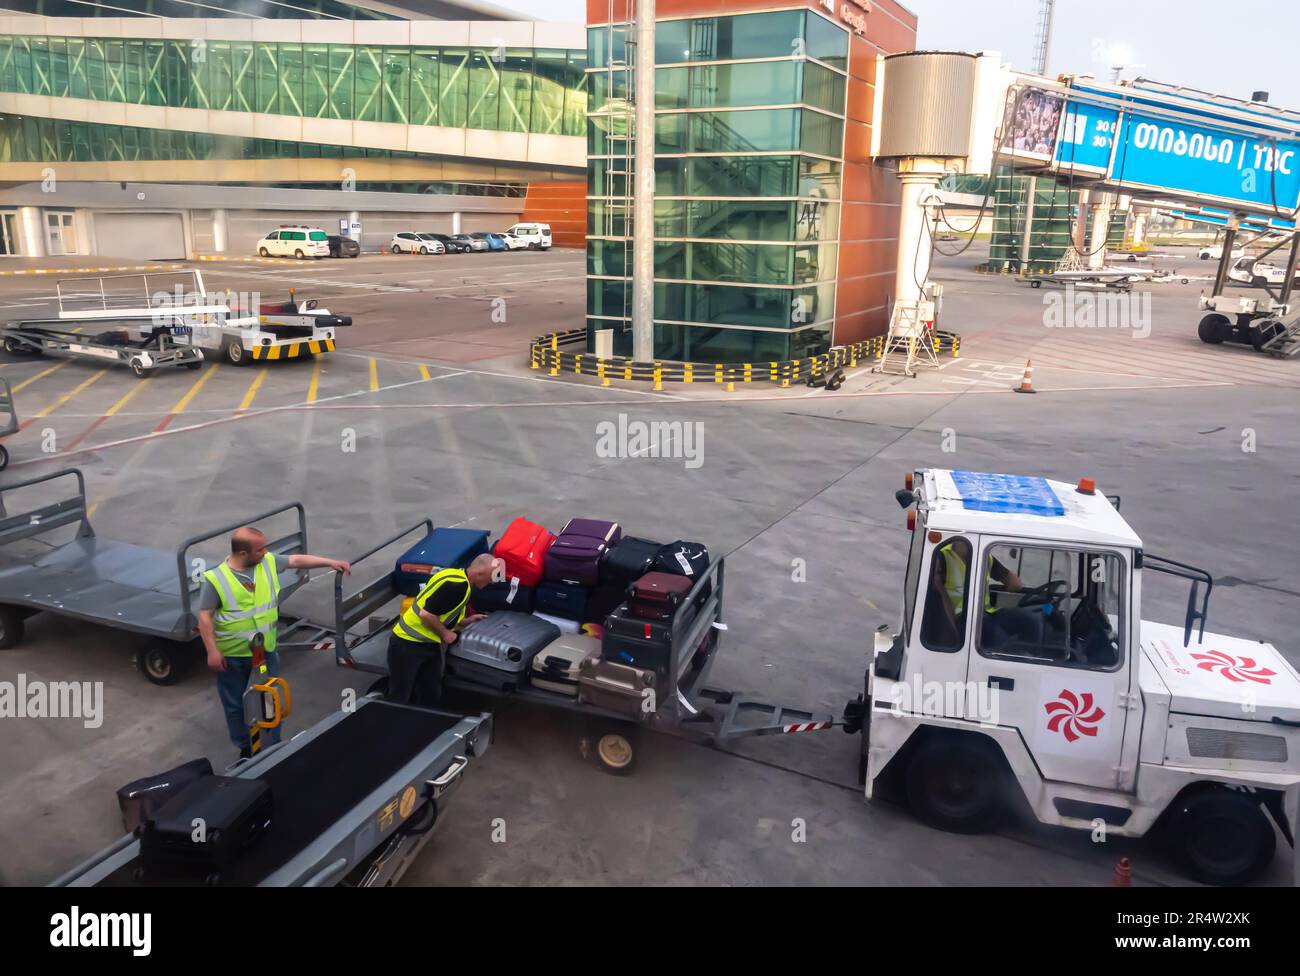 Airport workers load baggage into a luggage vehicle from an airplane. Tbilisi airport, Georgia. Airport Cargo Loading Cars, Baggage tractor-trailers Stock Photo